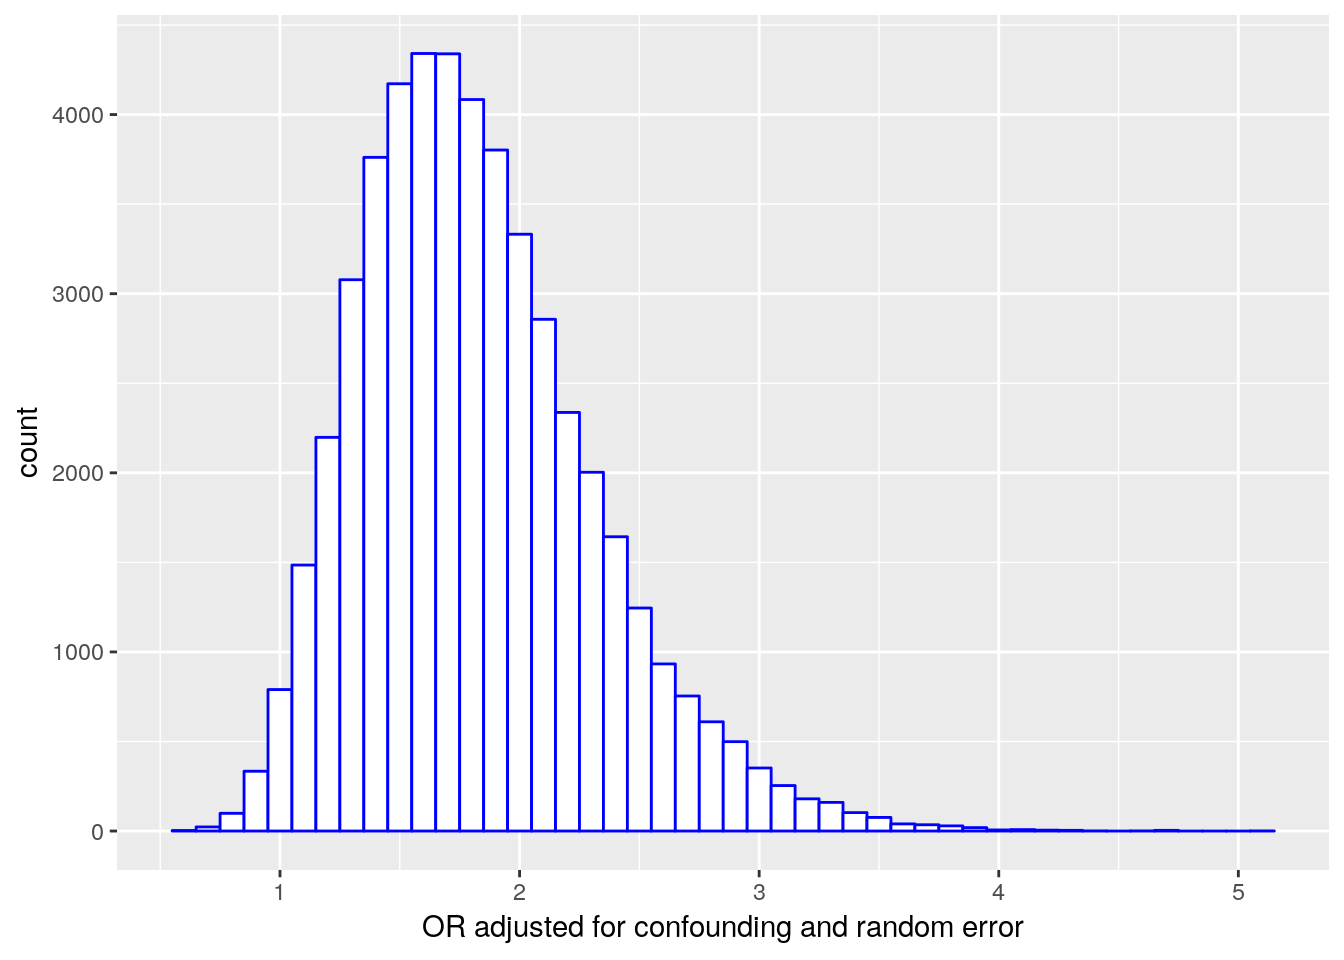 Distribution of the 50,000 confounder-adjusted odds ratios.